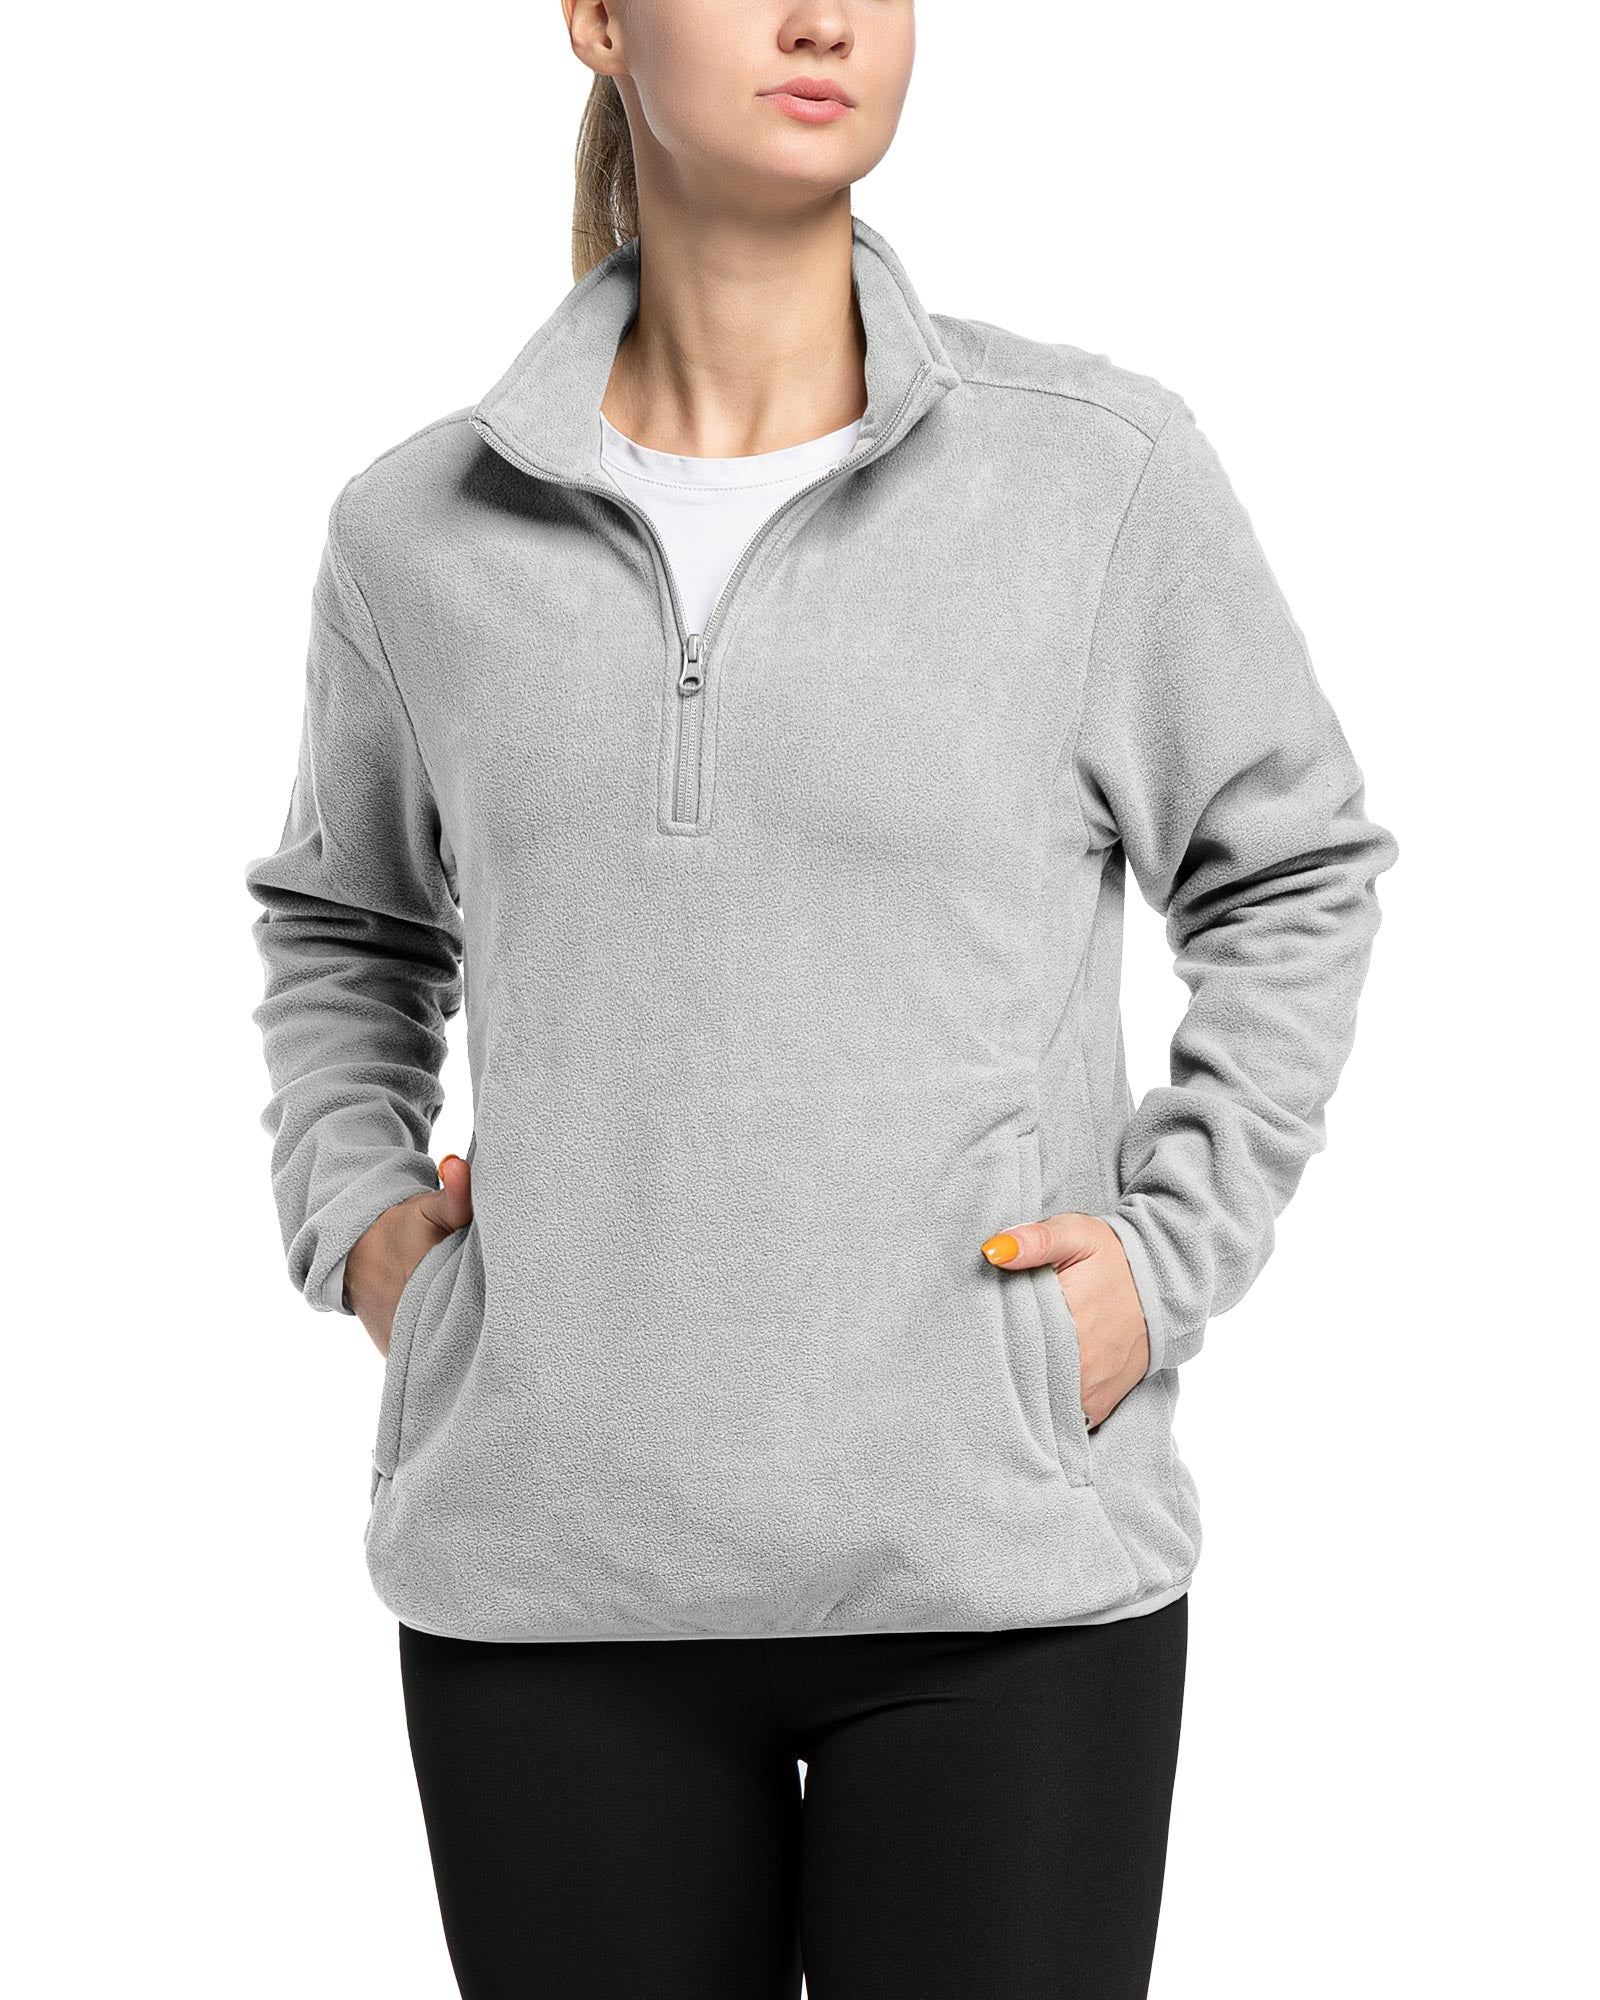 THE GYM PEOPLE Women's Basic Pullover Hoodie Loose fit Ultra Soft Fleece  hooded Sweatshirt With Pockets (fleece lined-Black, Small) at   Women's Clothing store